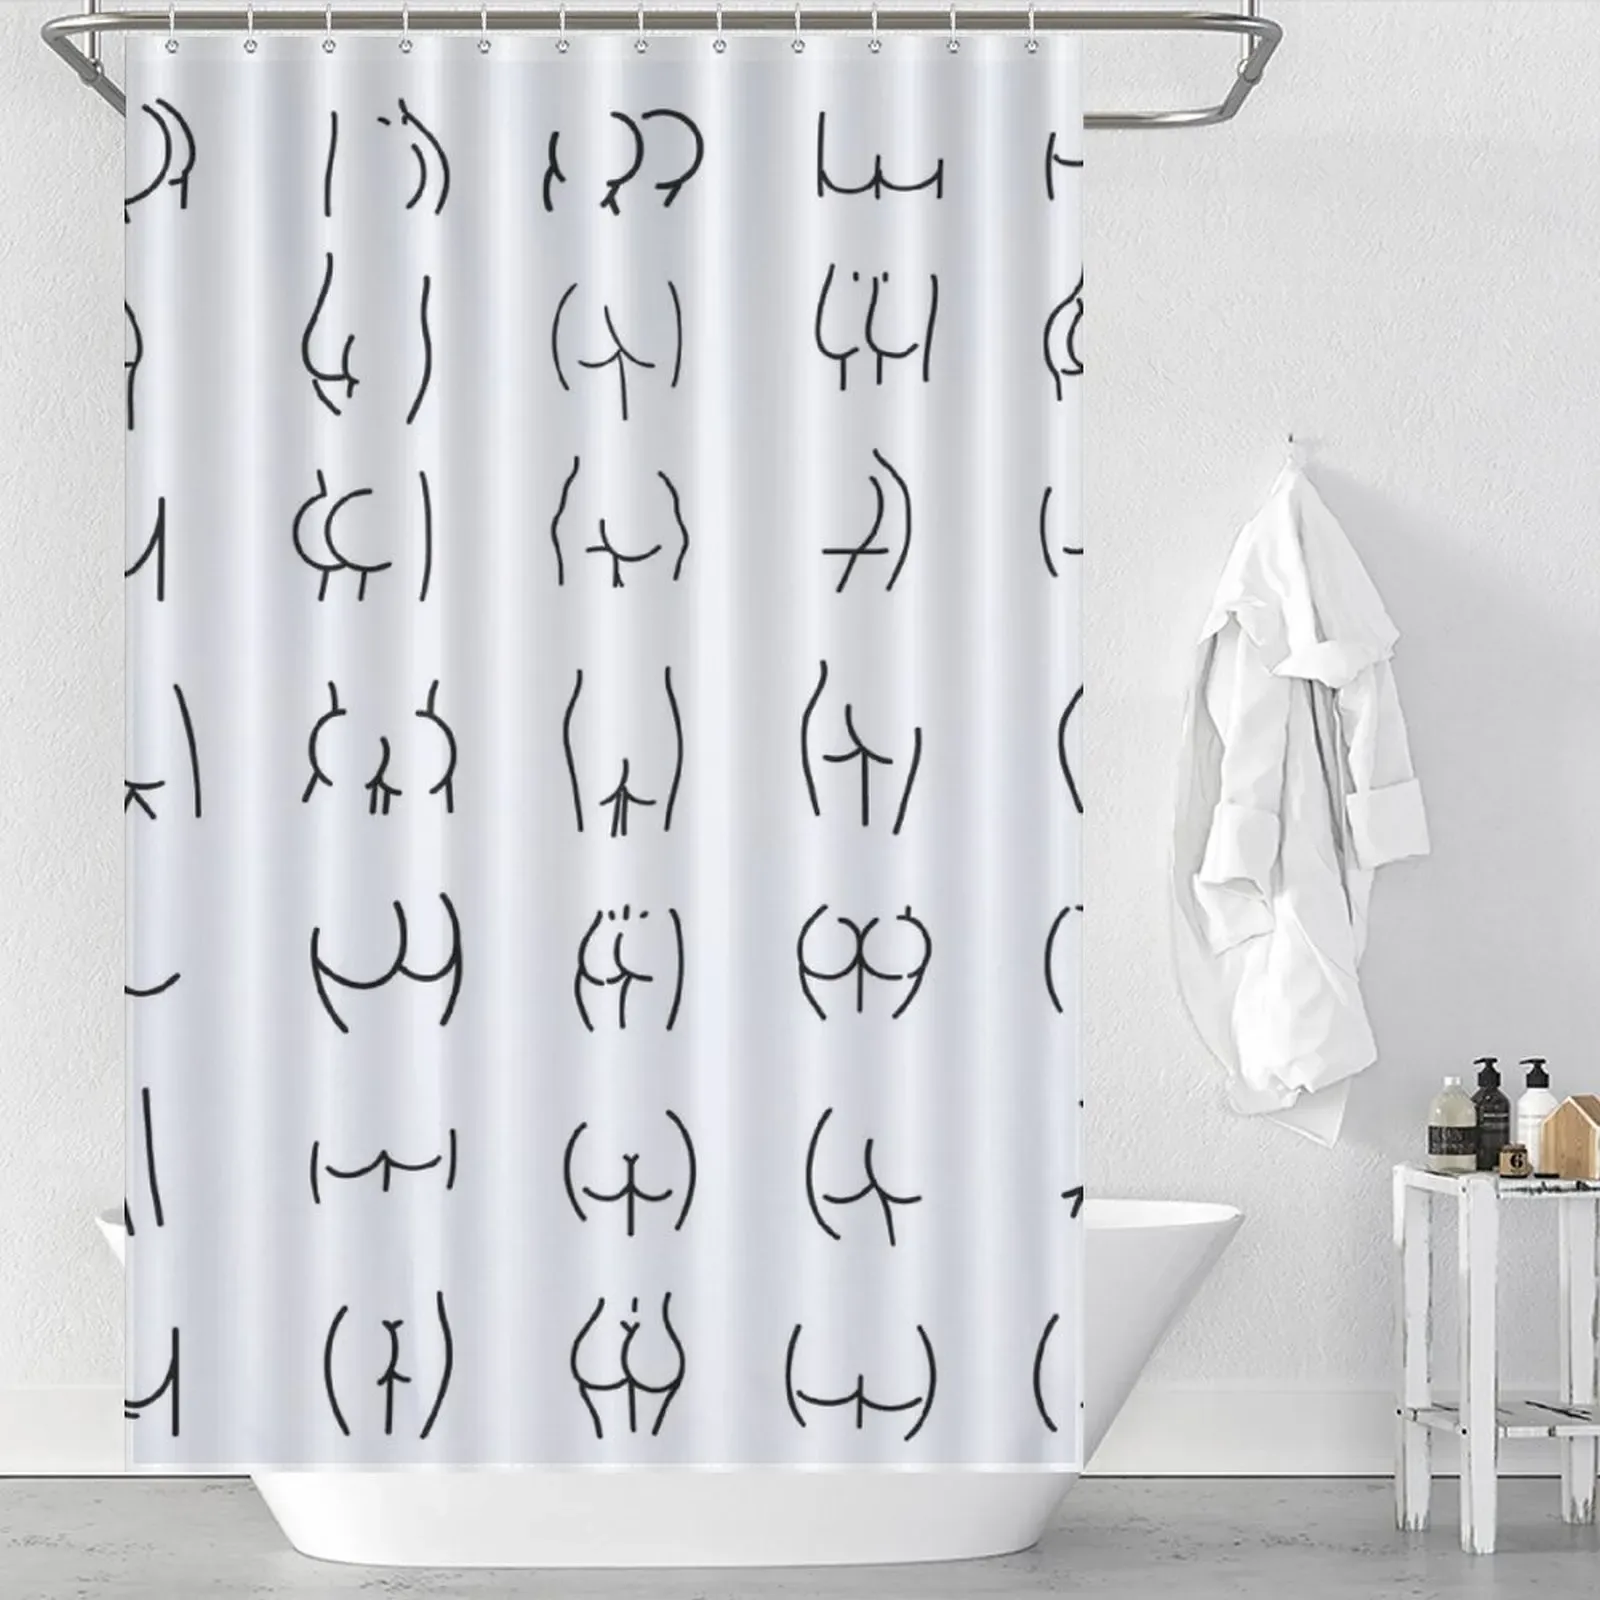 Guest bathroom shower curtain ideas: A white shower curtain with black and white drawings on it.